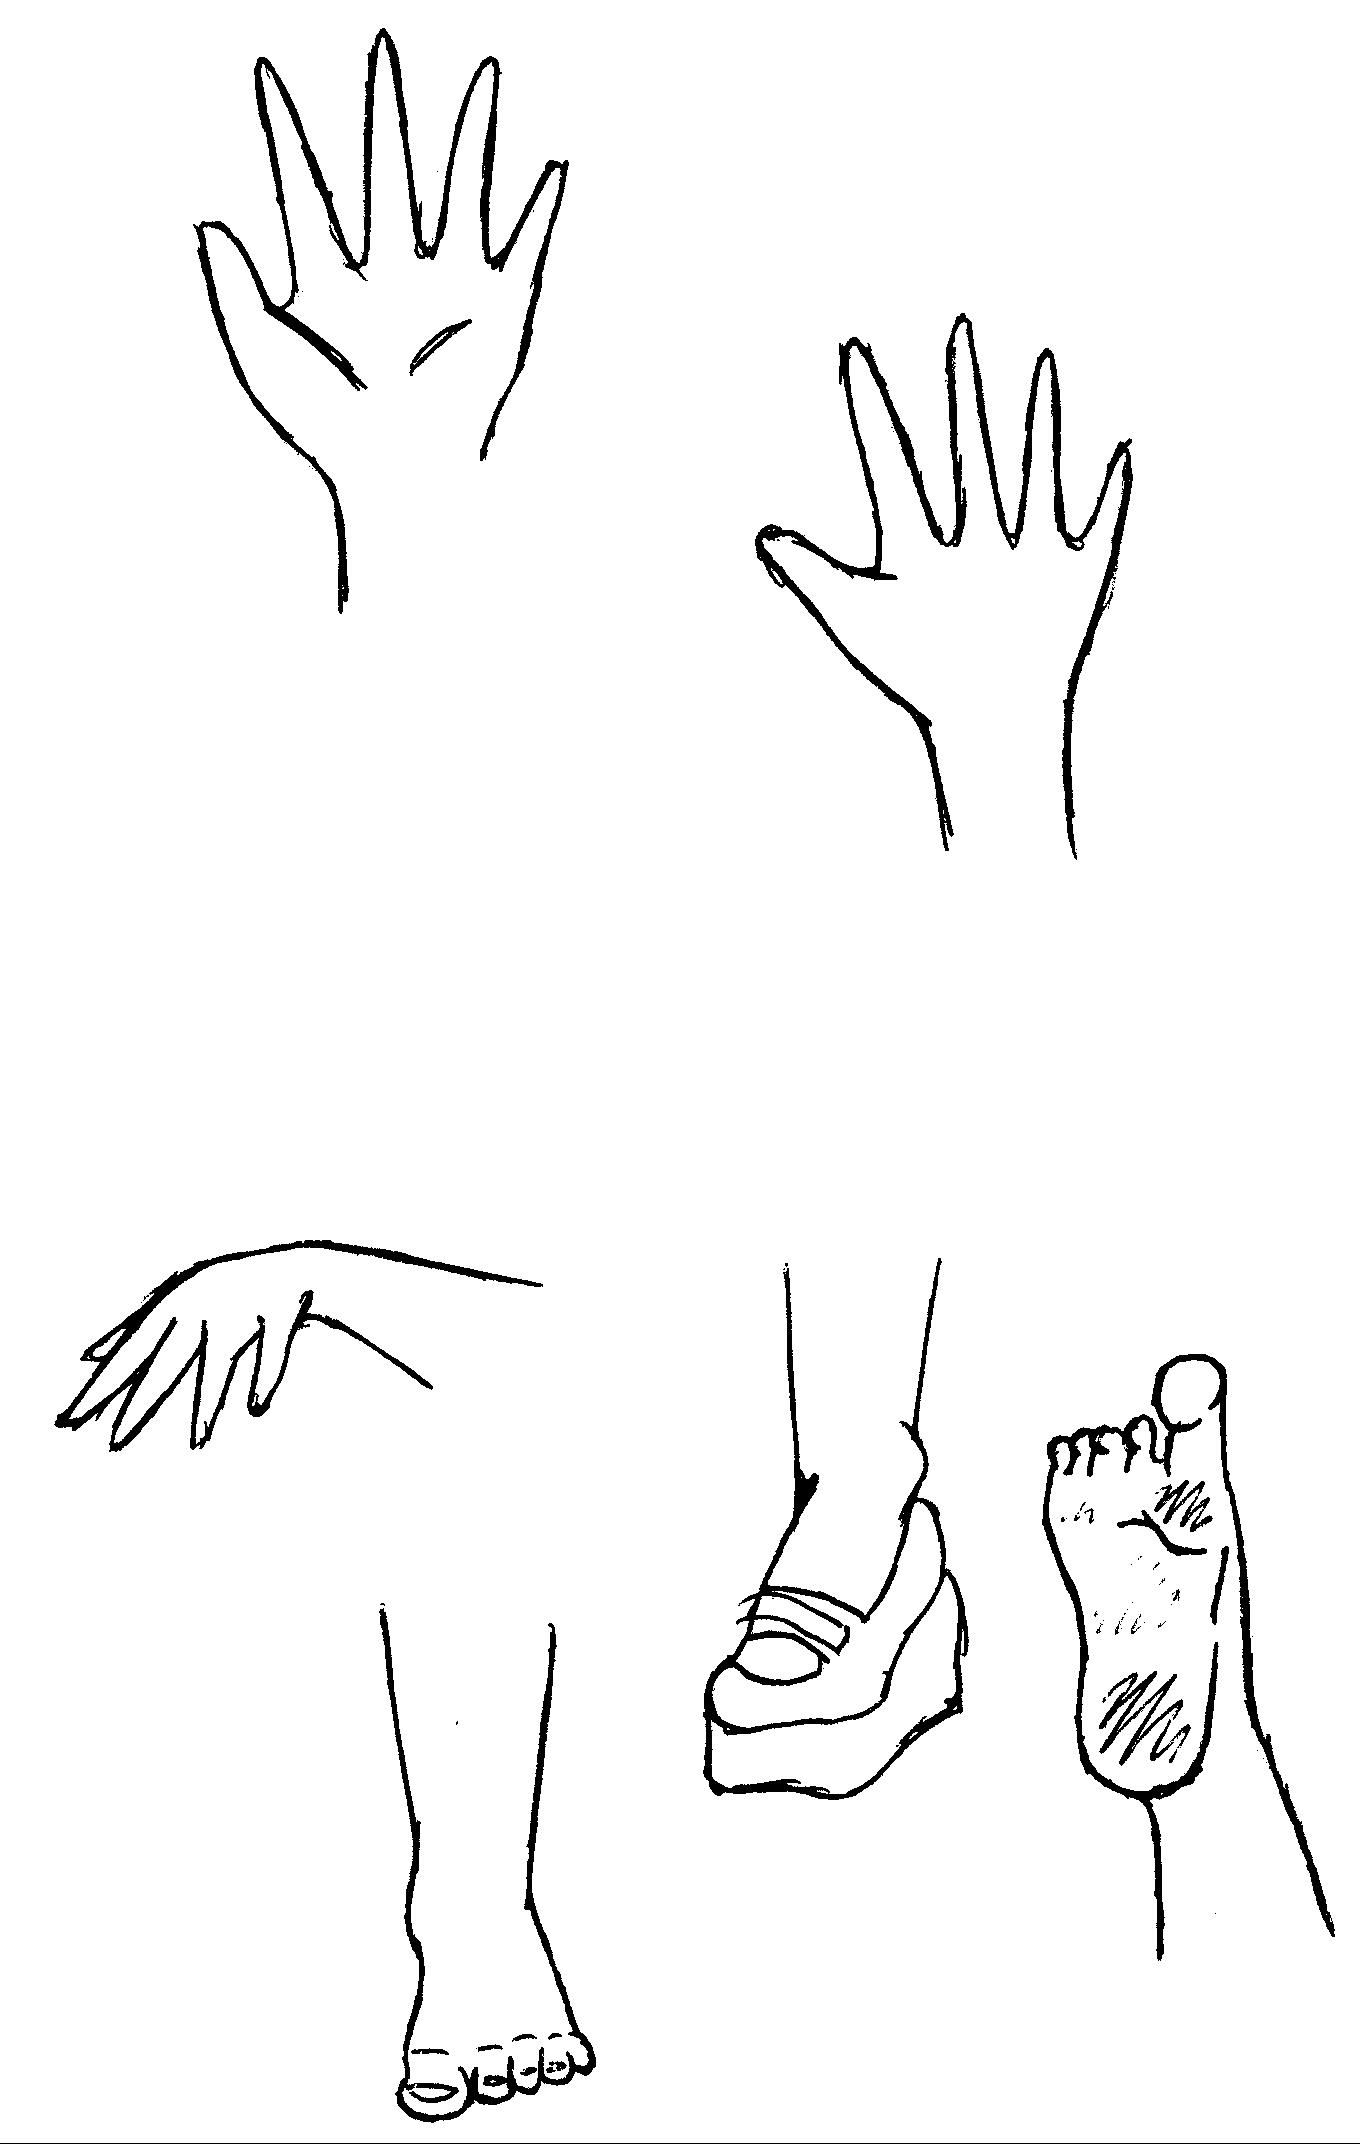 Hands and Feet doodles by Insight